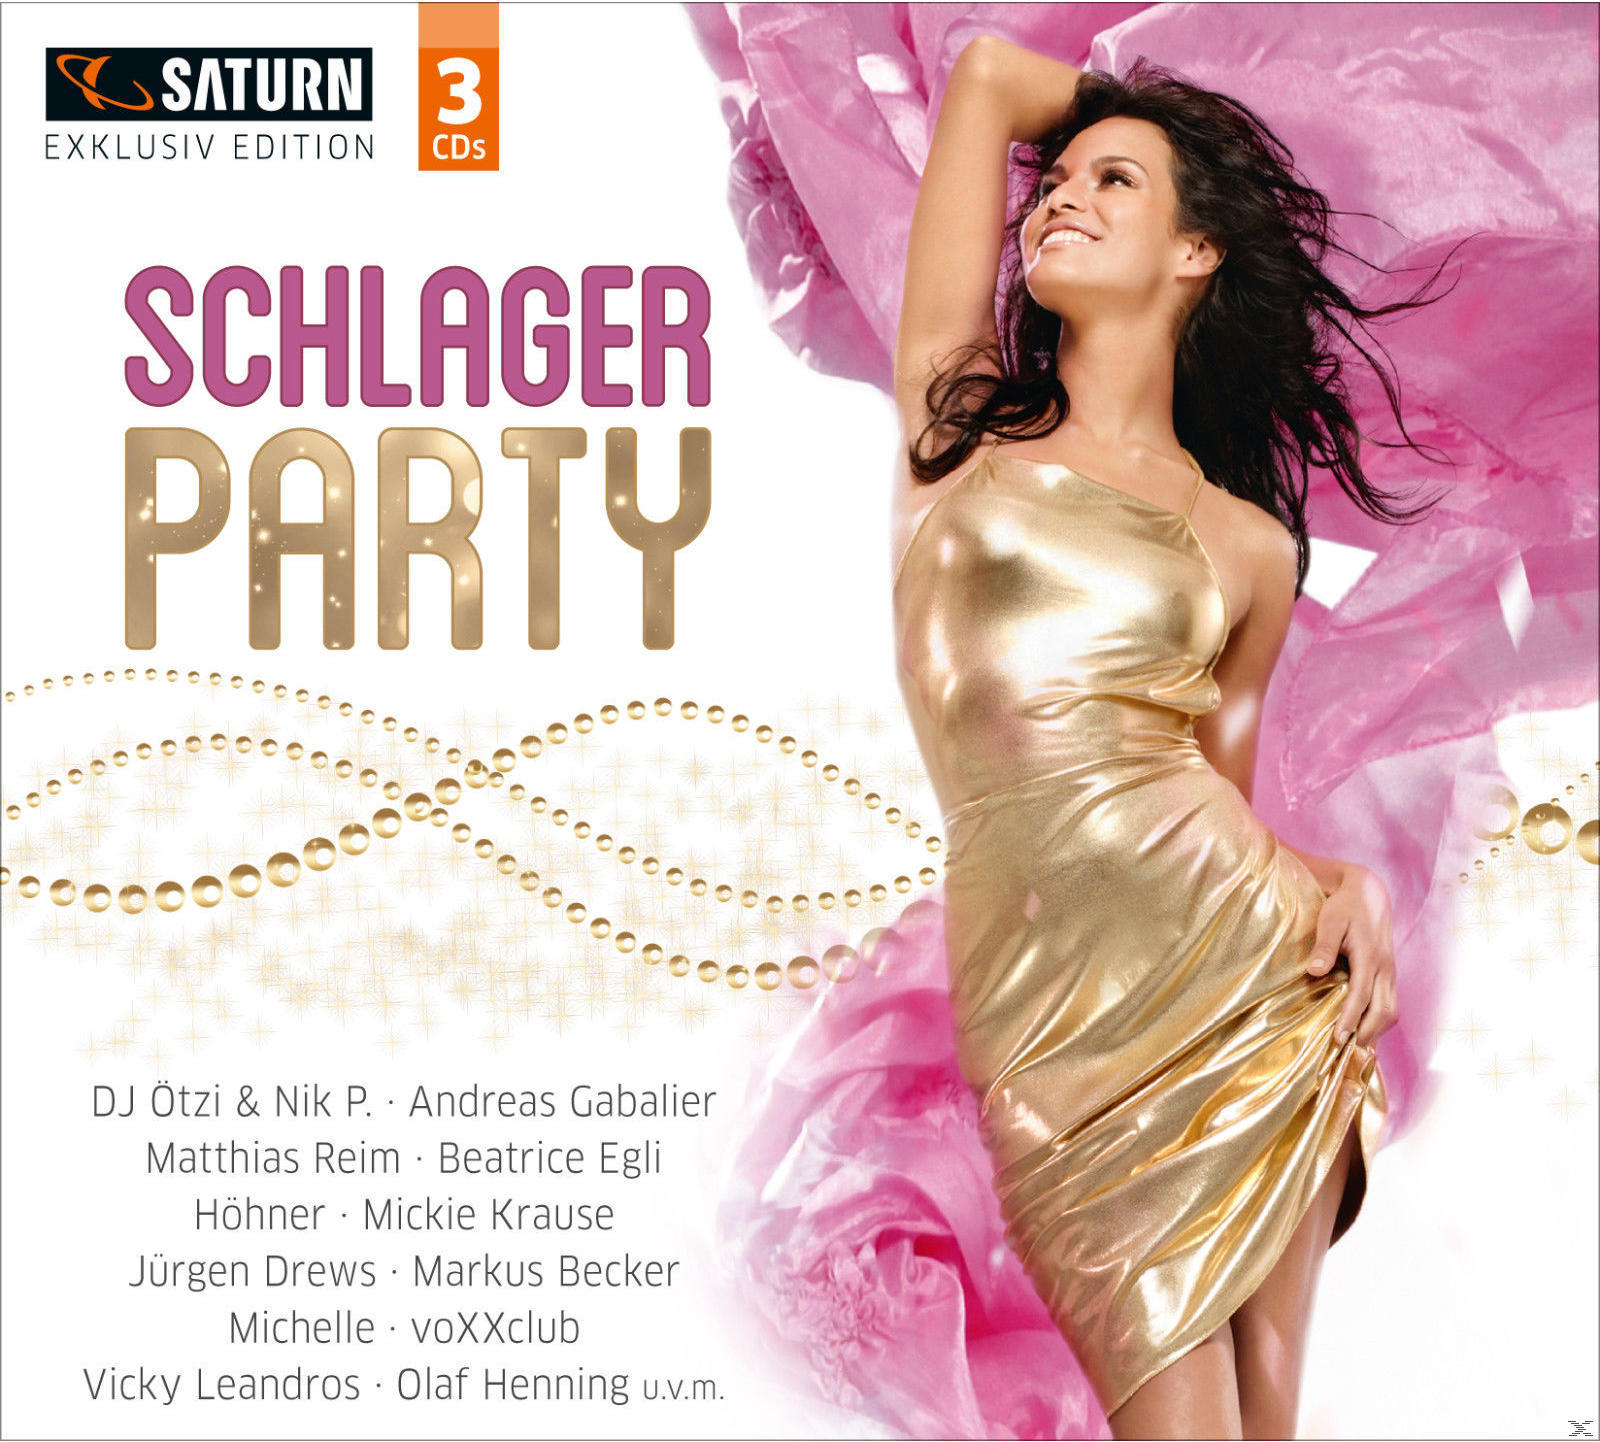 VARIOUS - Schlager Party (CD) (Saturn - Exclusiv)